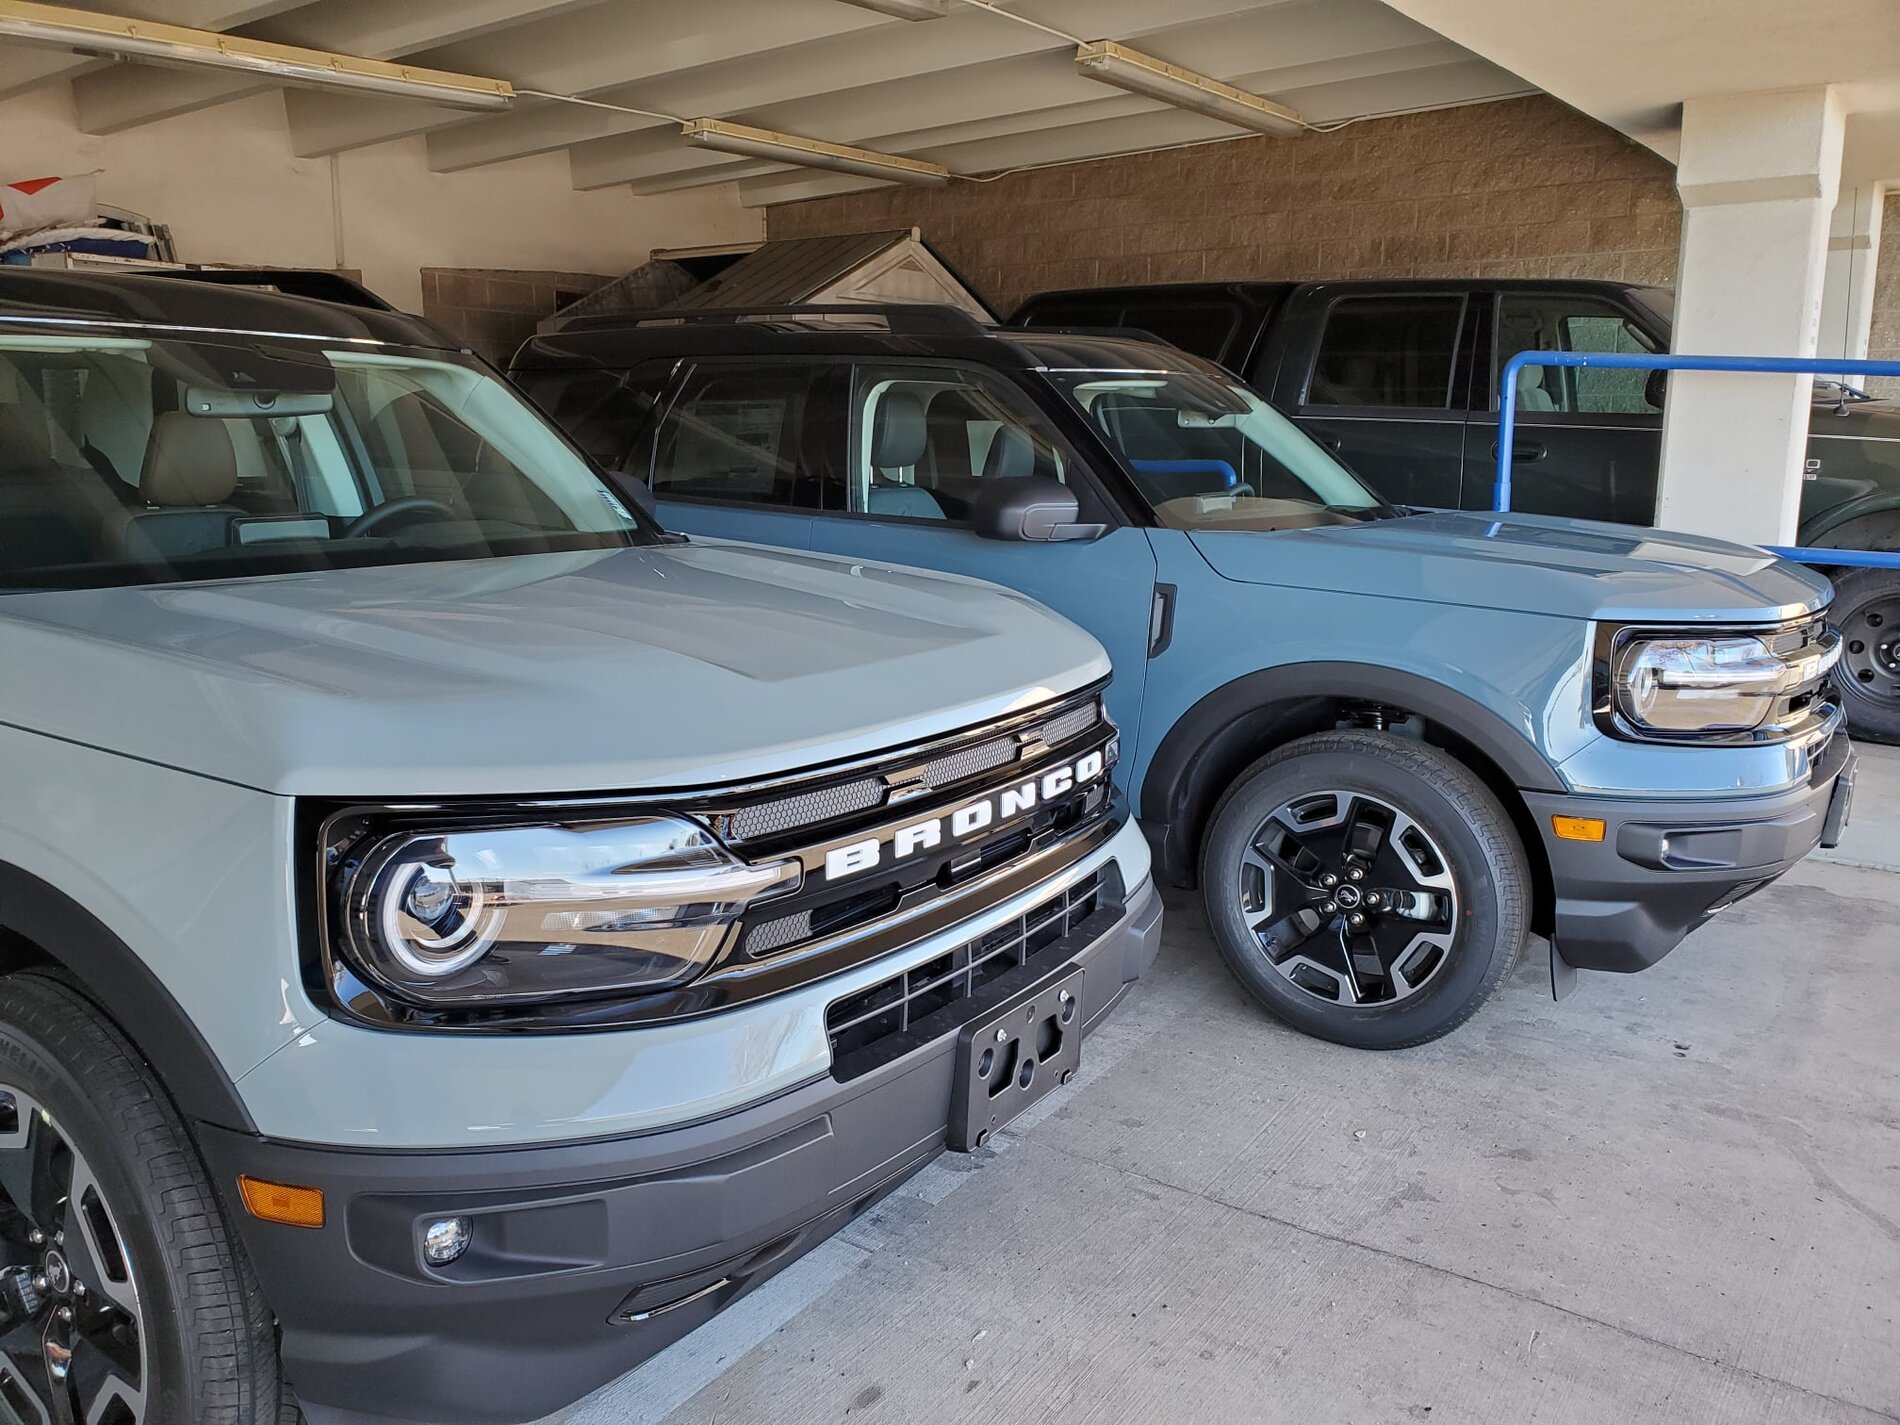 Ford Bronco Area 51 vs Cactus Gray side-by-side comparison (on Sport) 082816_10224792991240819_9083646311603624376_o-